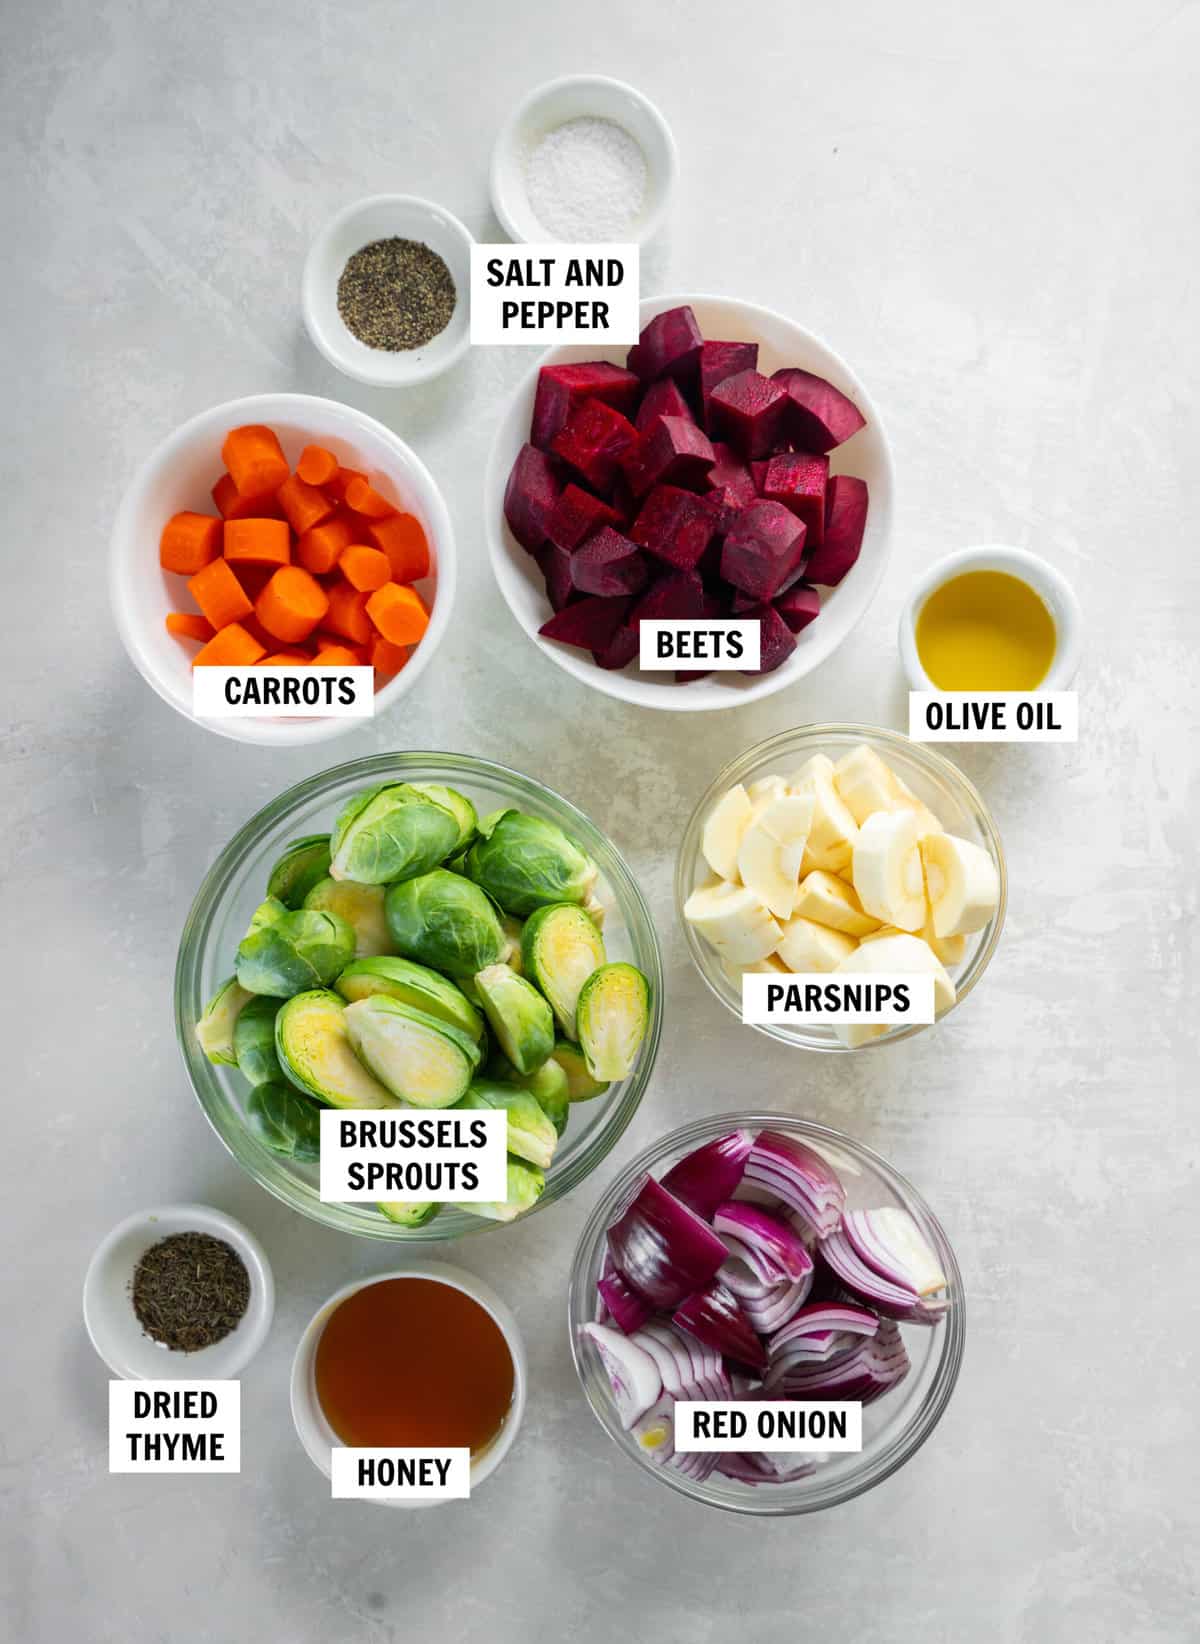 All of the ingredients for honey roasted vegetables on a white countertop in bowls including beets, brussels sprouts, carrots, parsnips, red onion, honey, olive oil, thyme, salt and pepper.